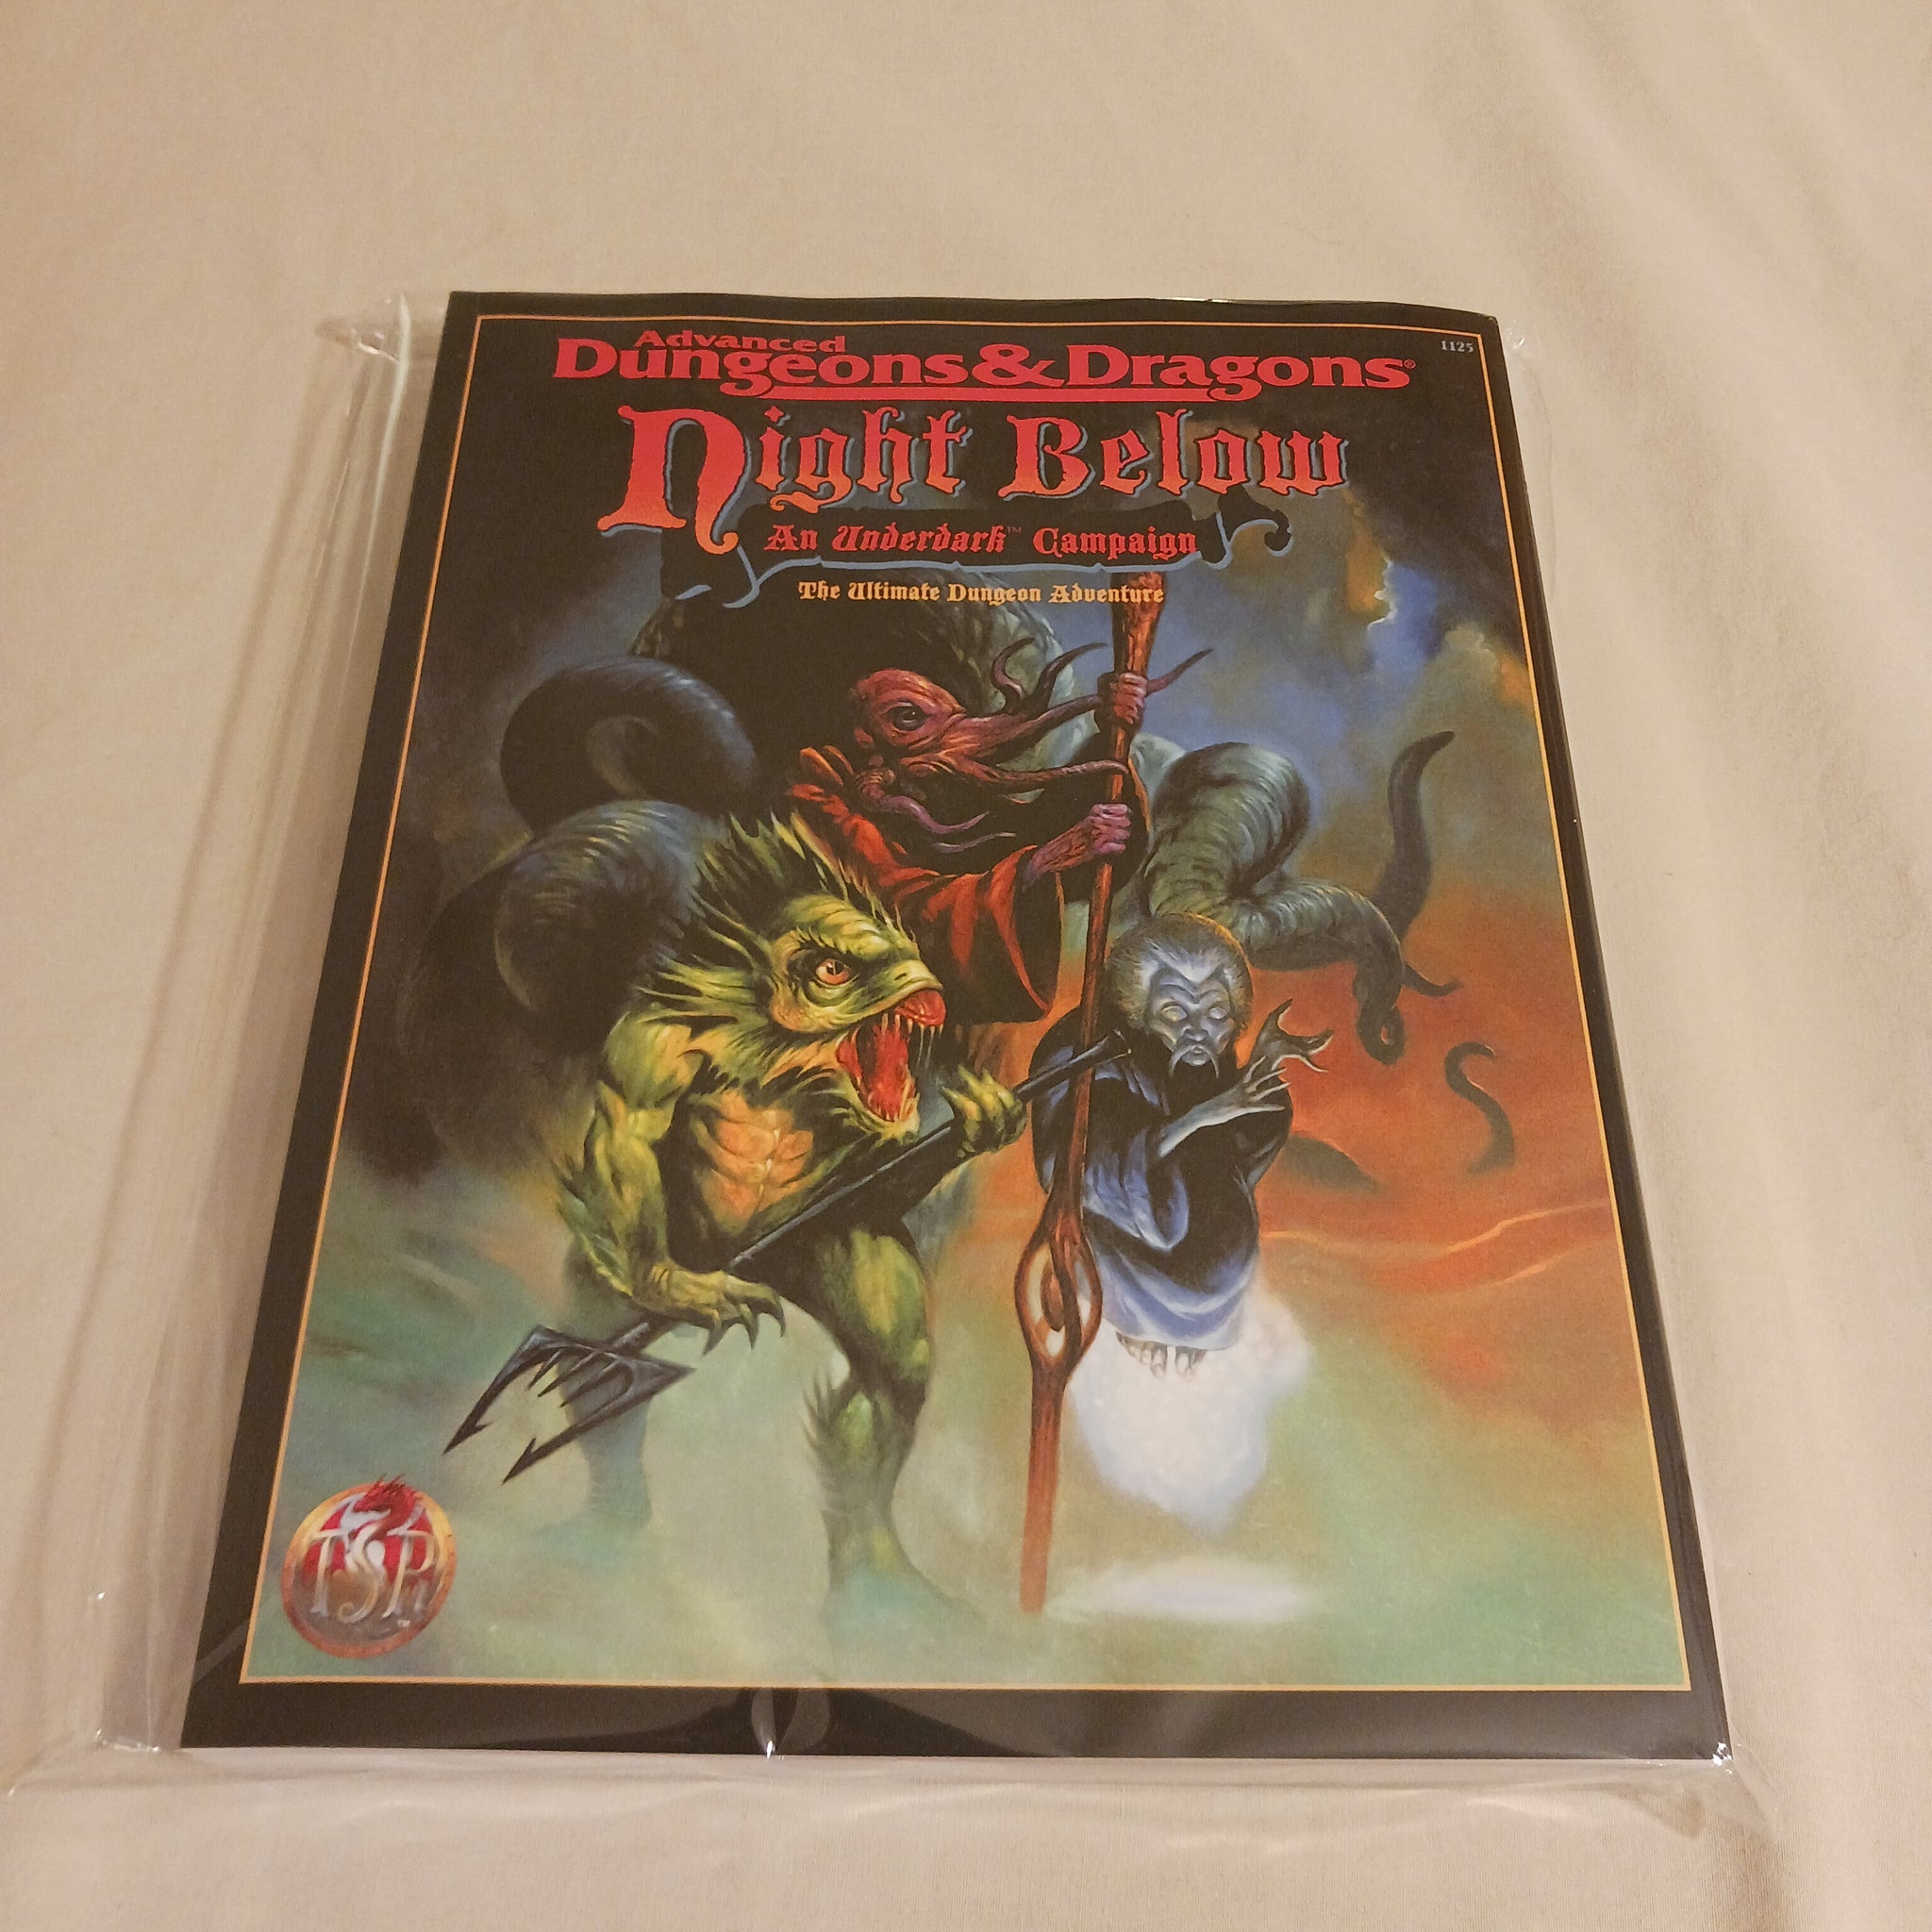 2nd edition Night Below An Underdark Campaign The Ultimate Dungeon Adventure softcover